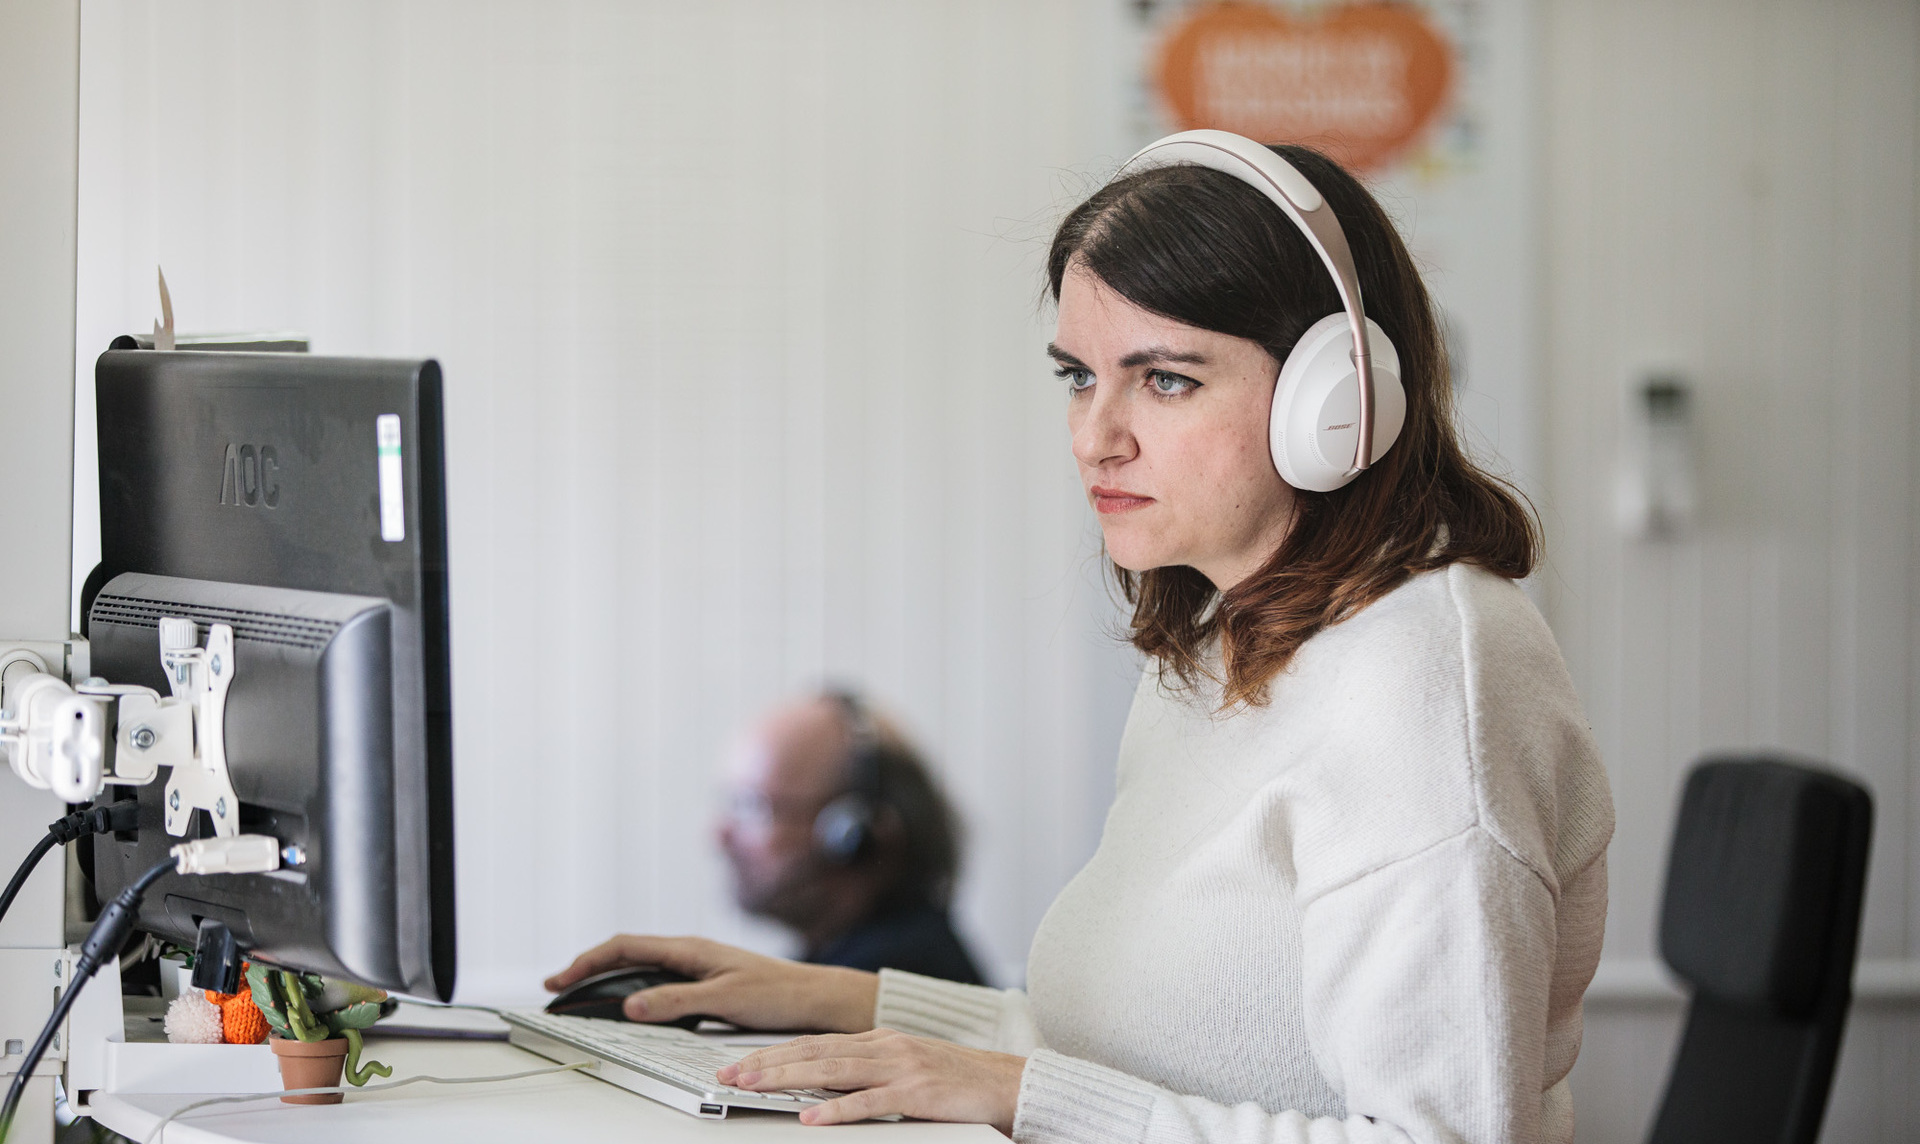 A lady with headphones on, stood at her desk designing a new website